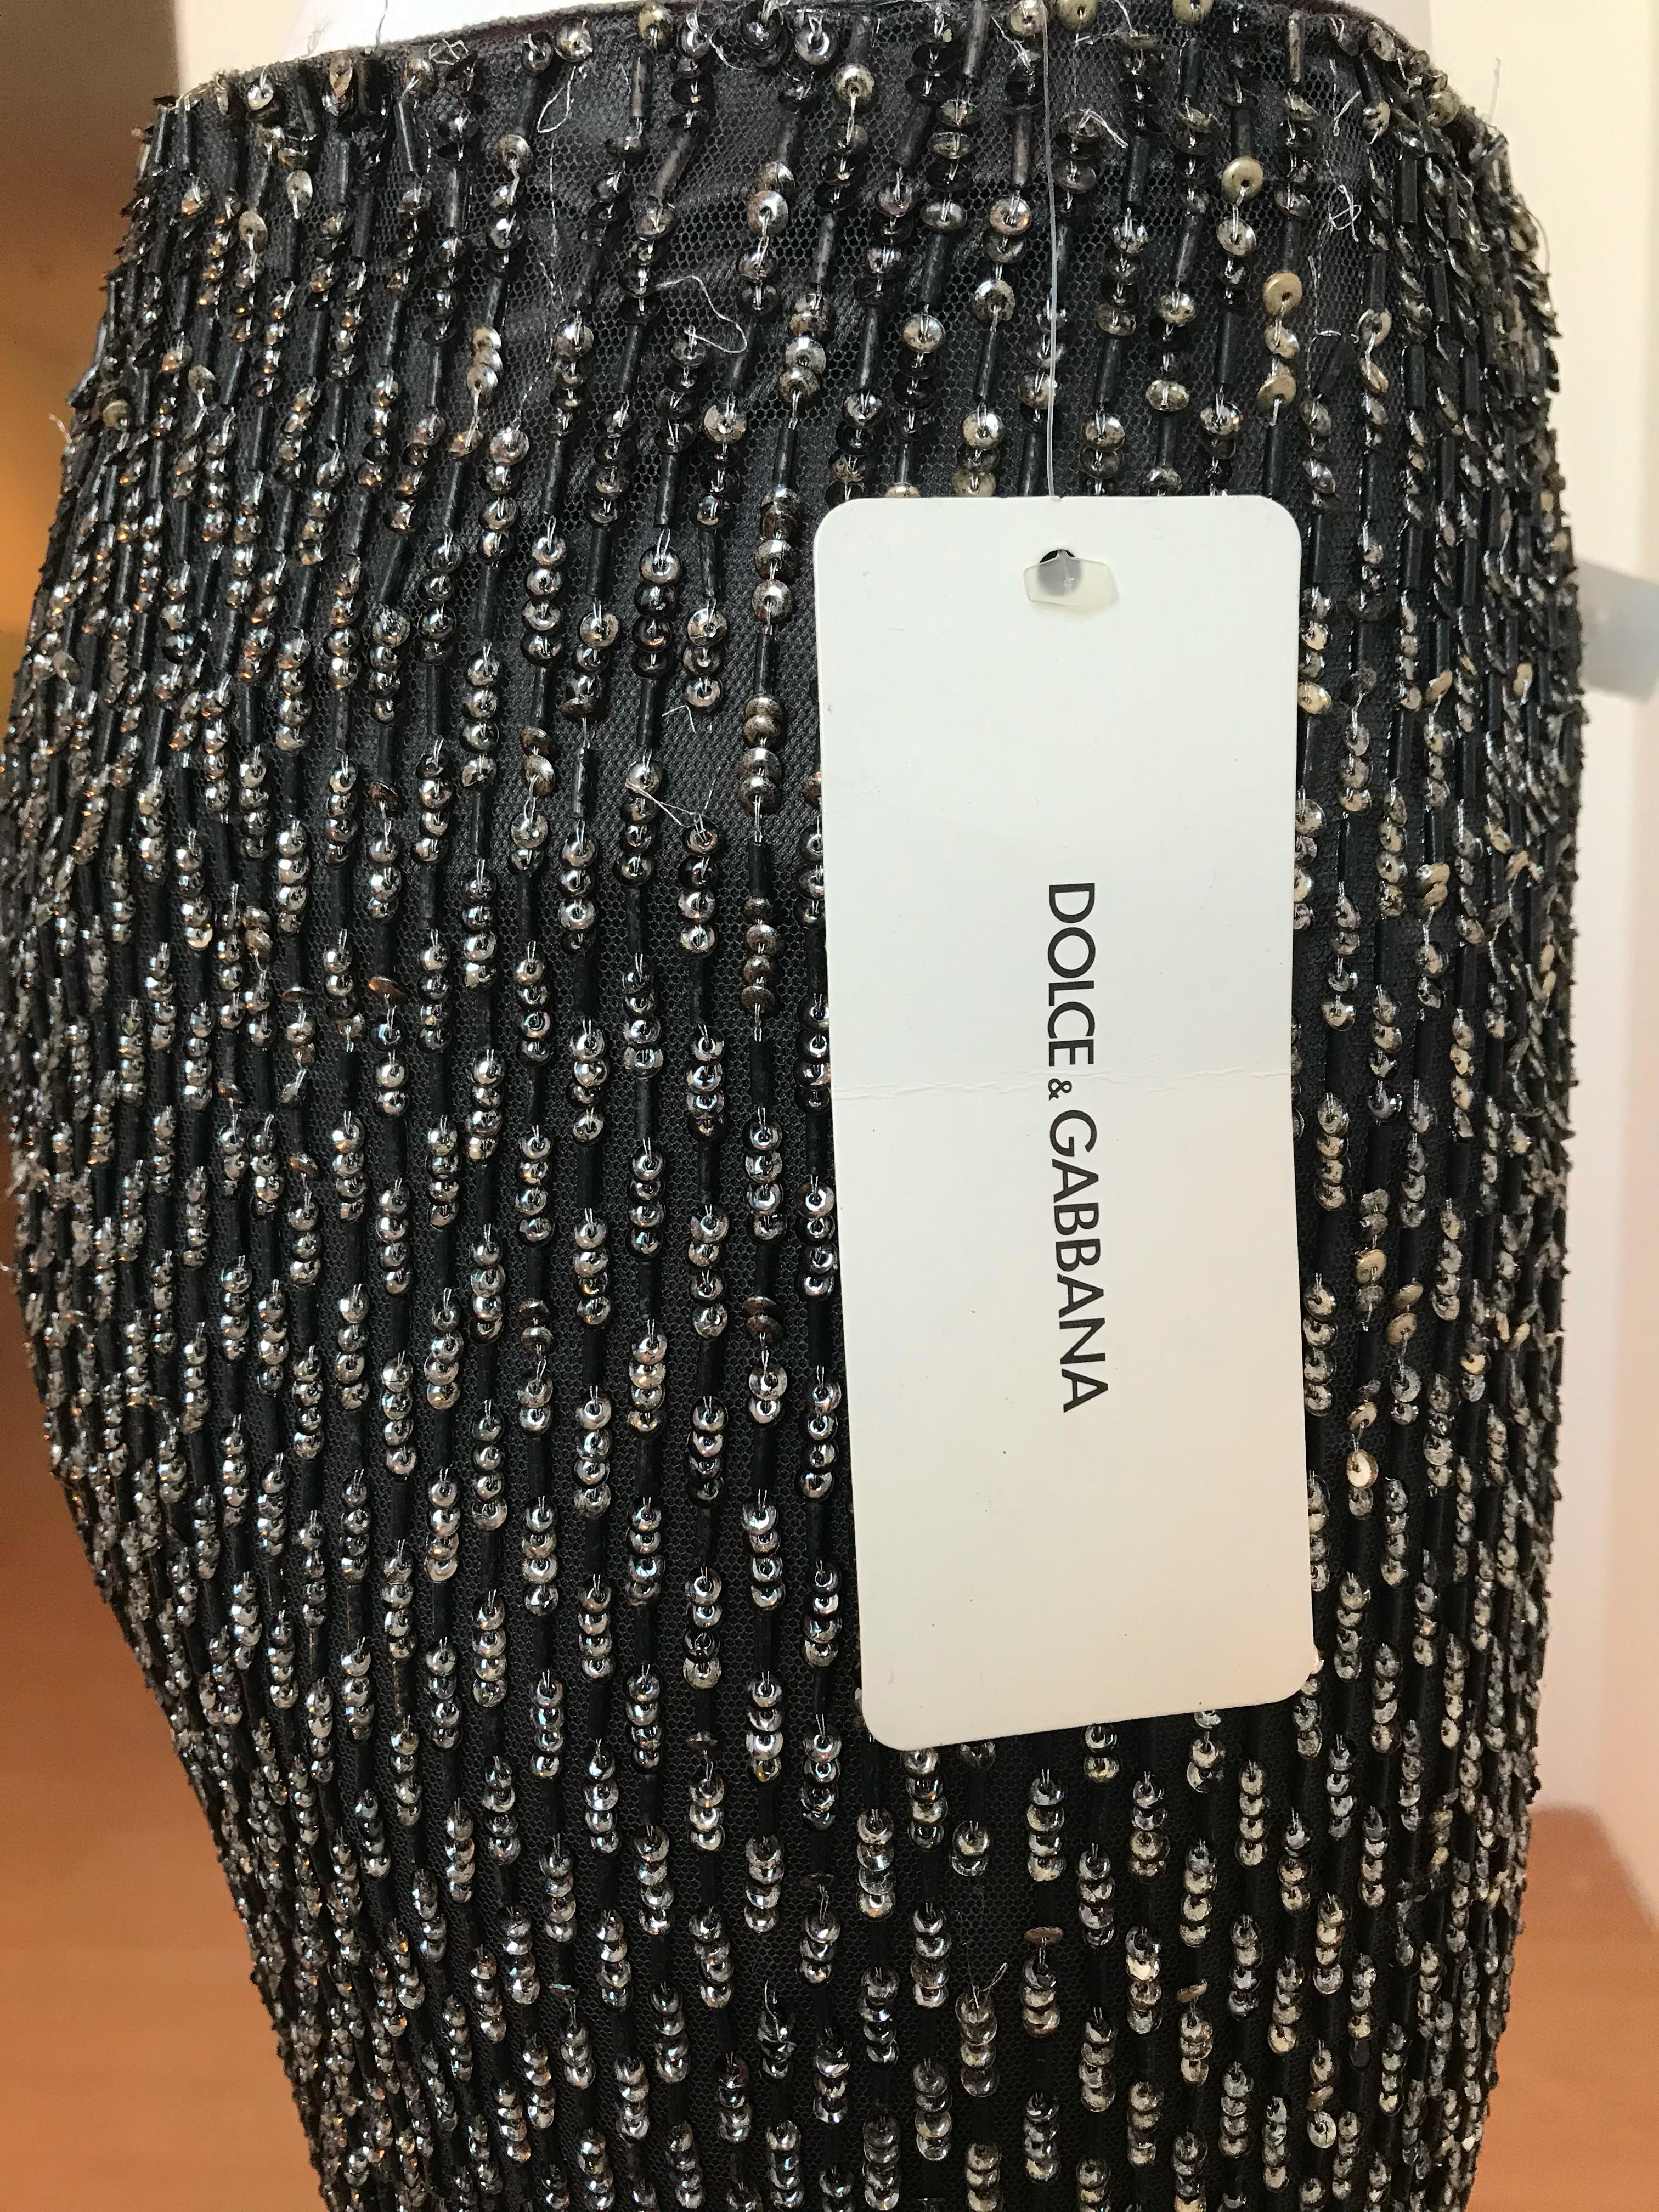 Dolce and Gabbana Metallic & Black Bugle Beaded and Sequin Skirt In Good Condition For Sale In Brooklyn, NY